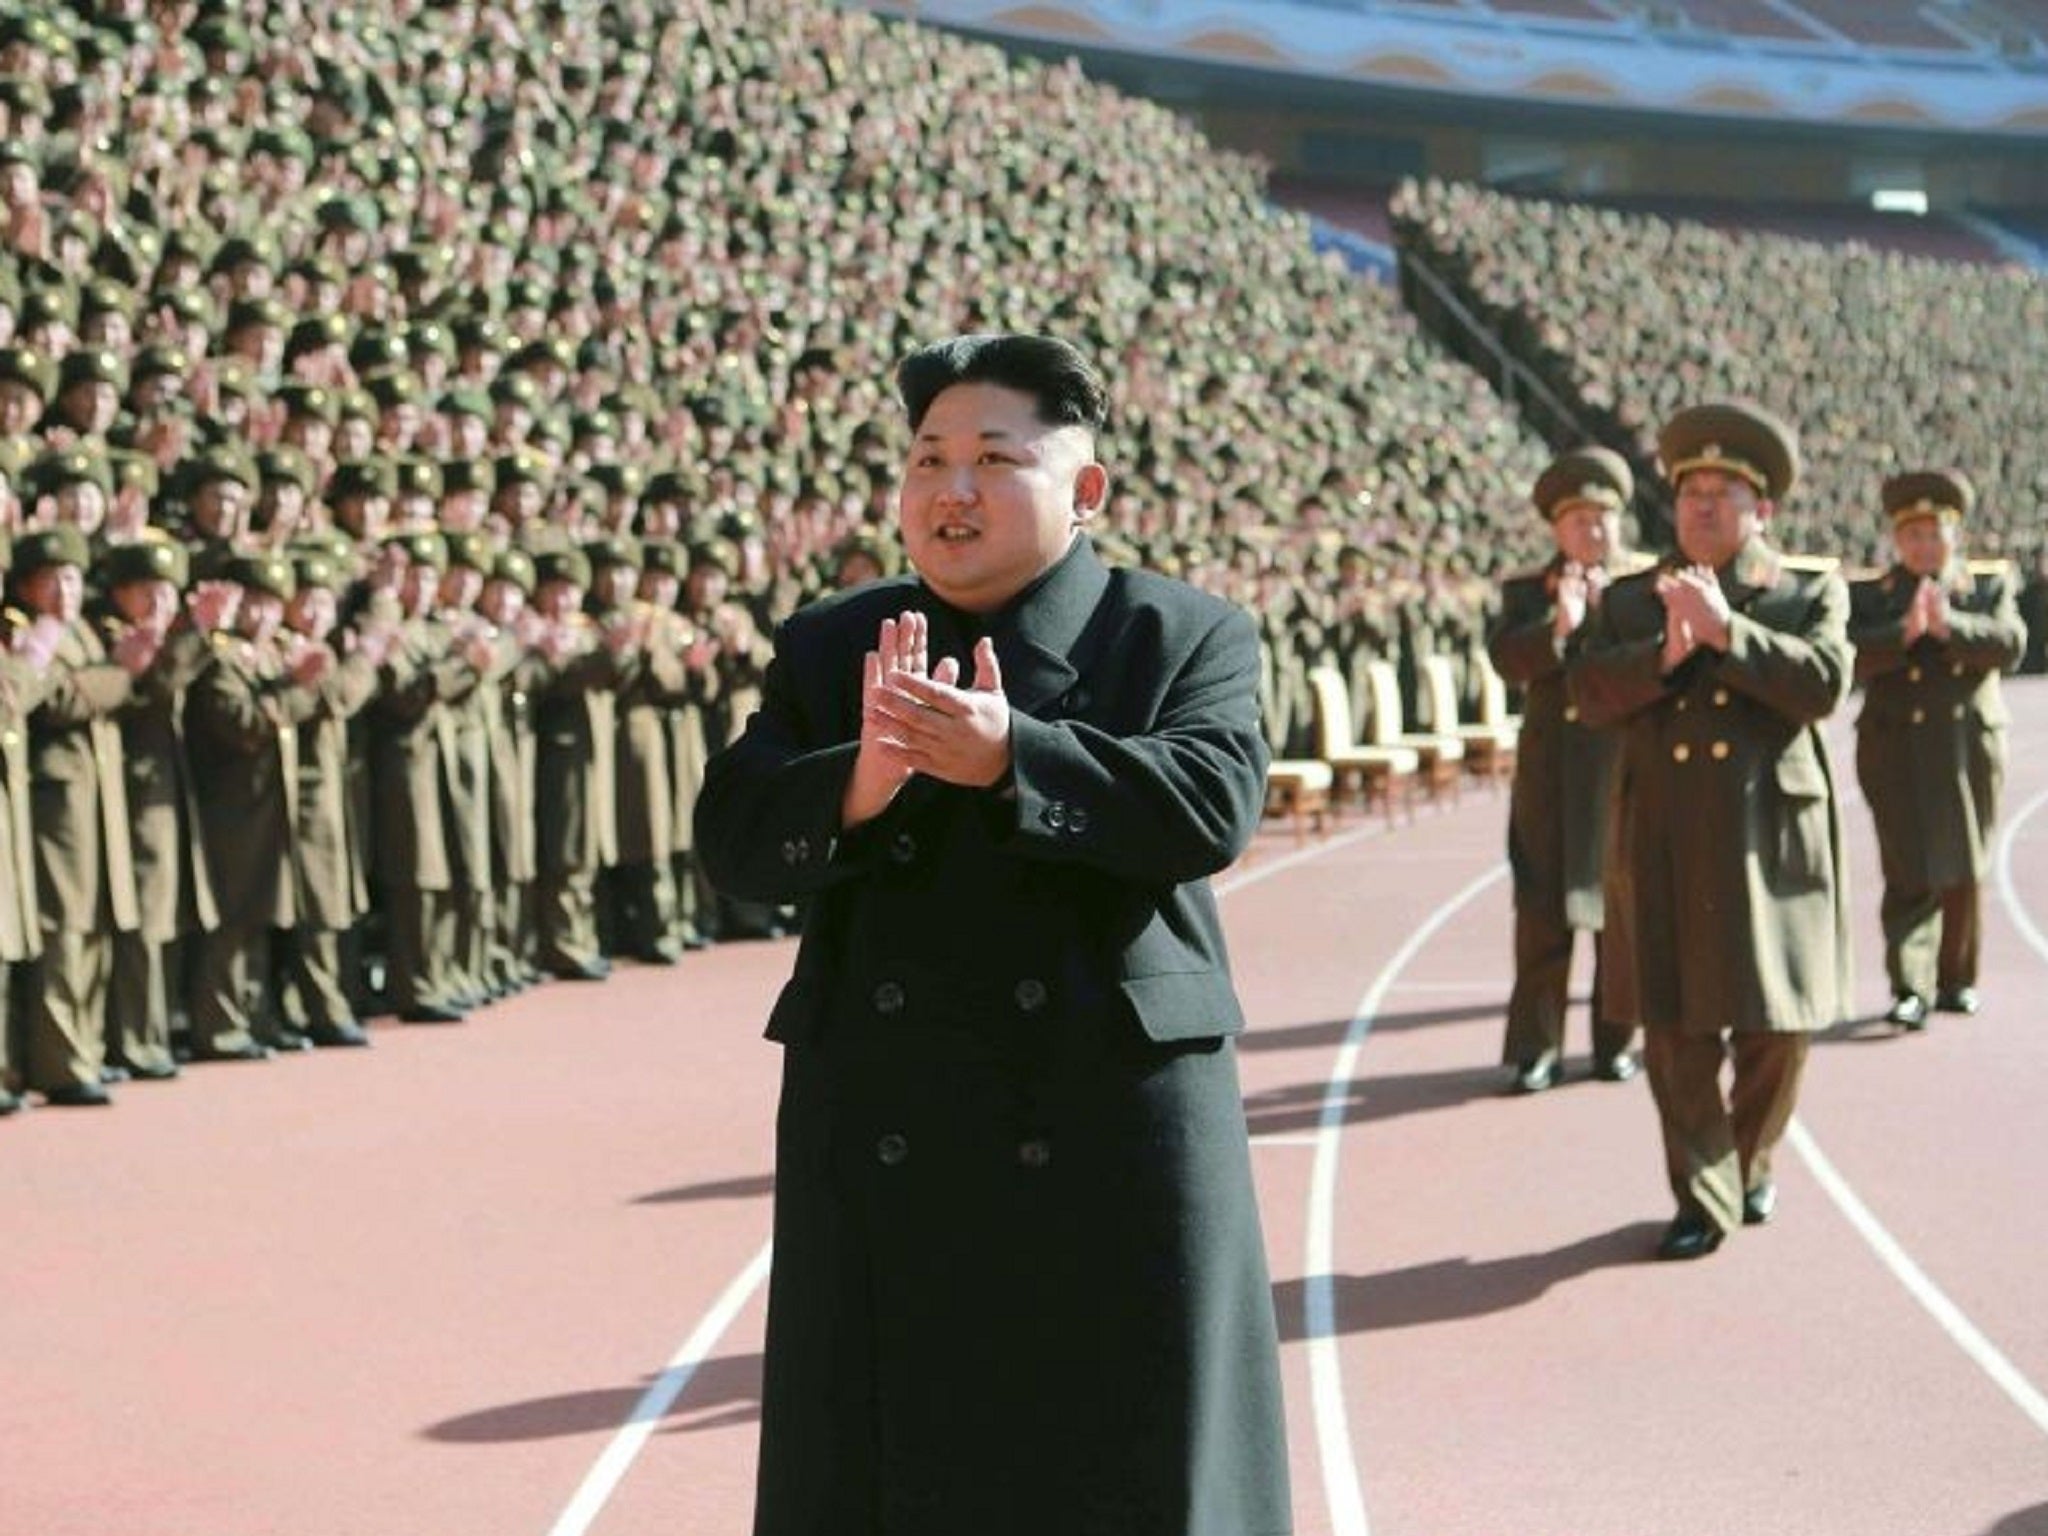 Kim Jong-un said he worries so much for the welfare of North Koreans that he cannot sleep at night